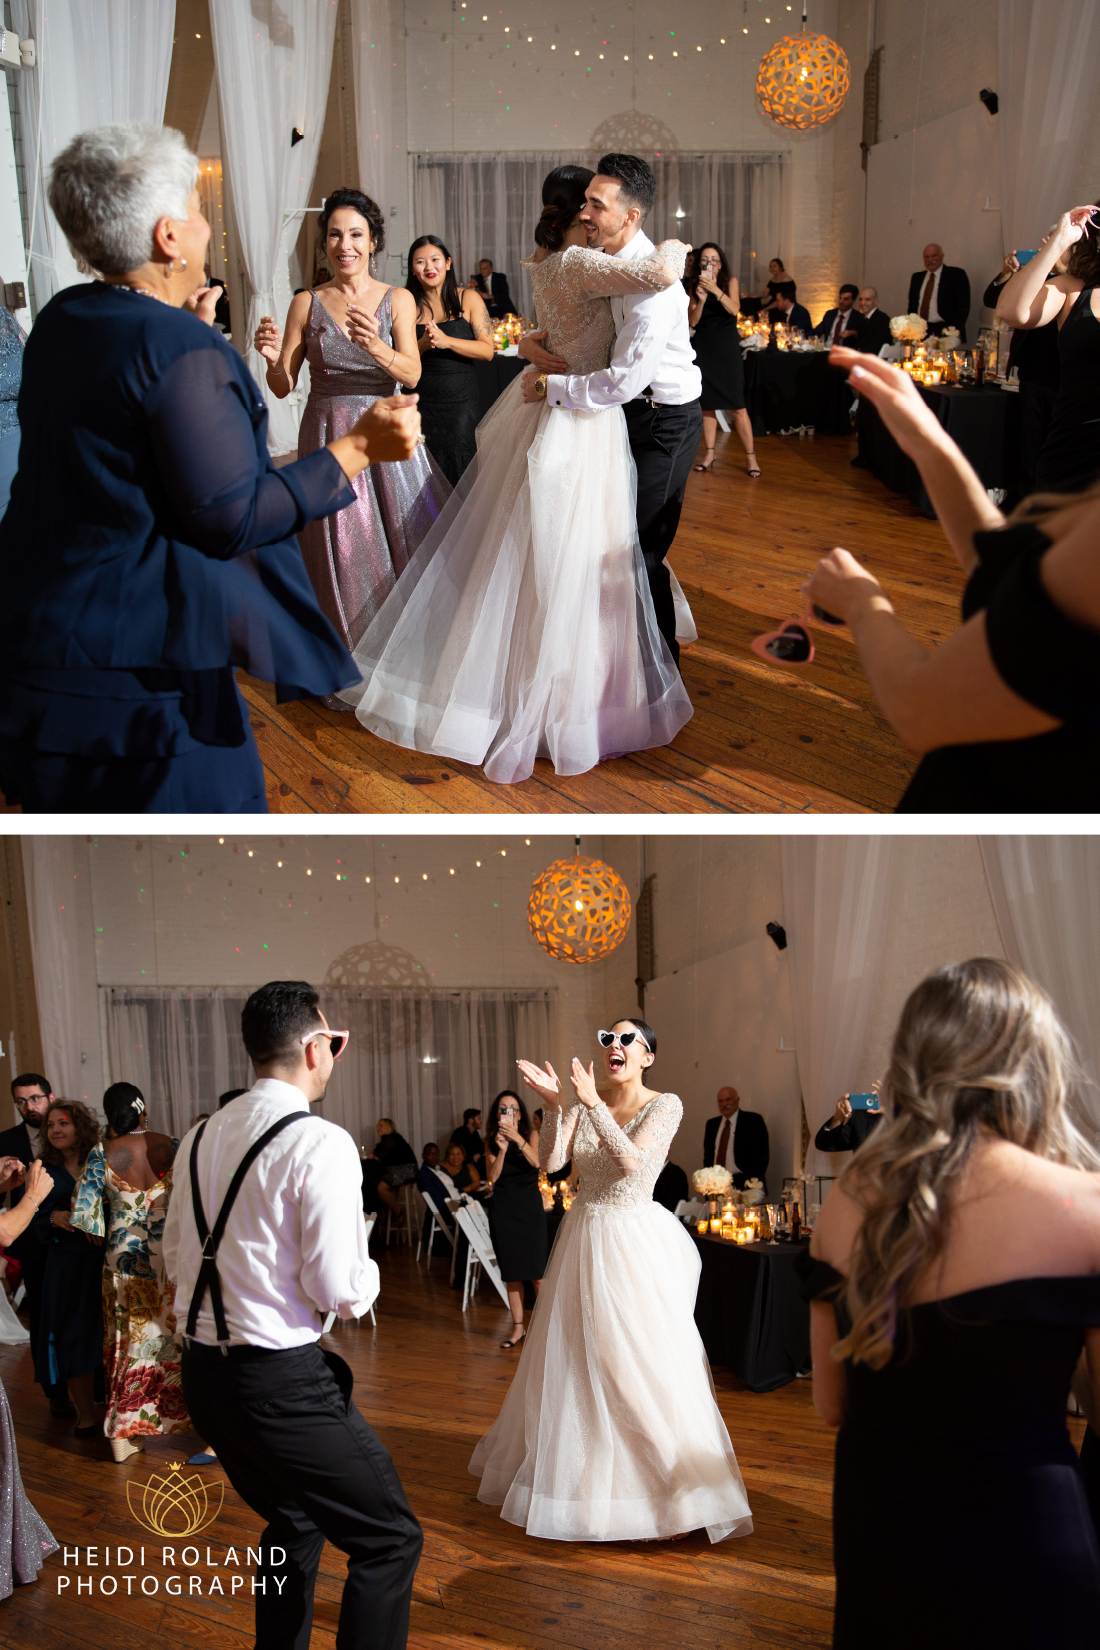 Bride and groom having fun on the dance floor at their old city wedding by Heidi Roland Photography